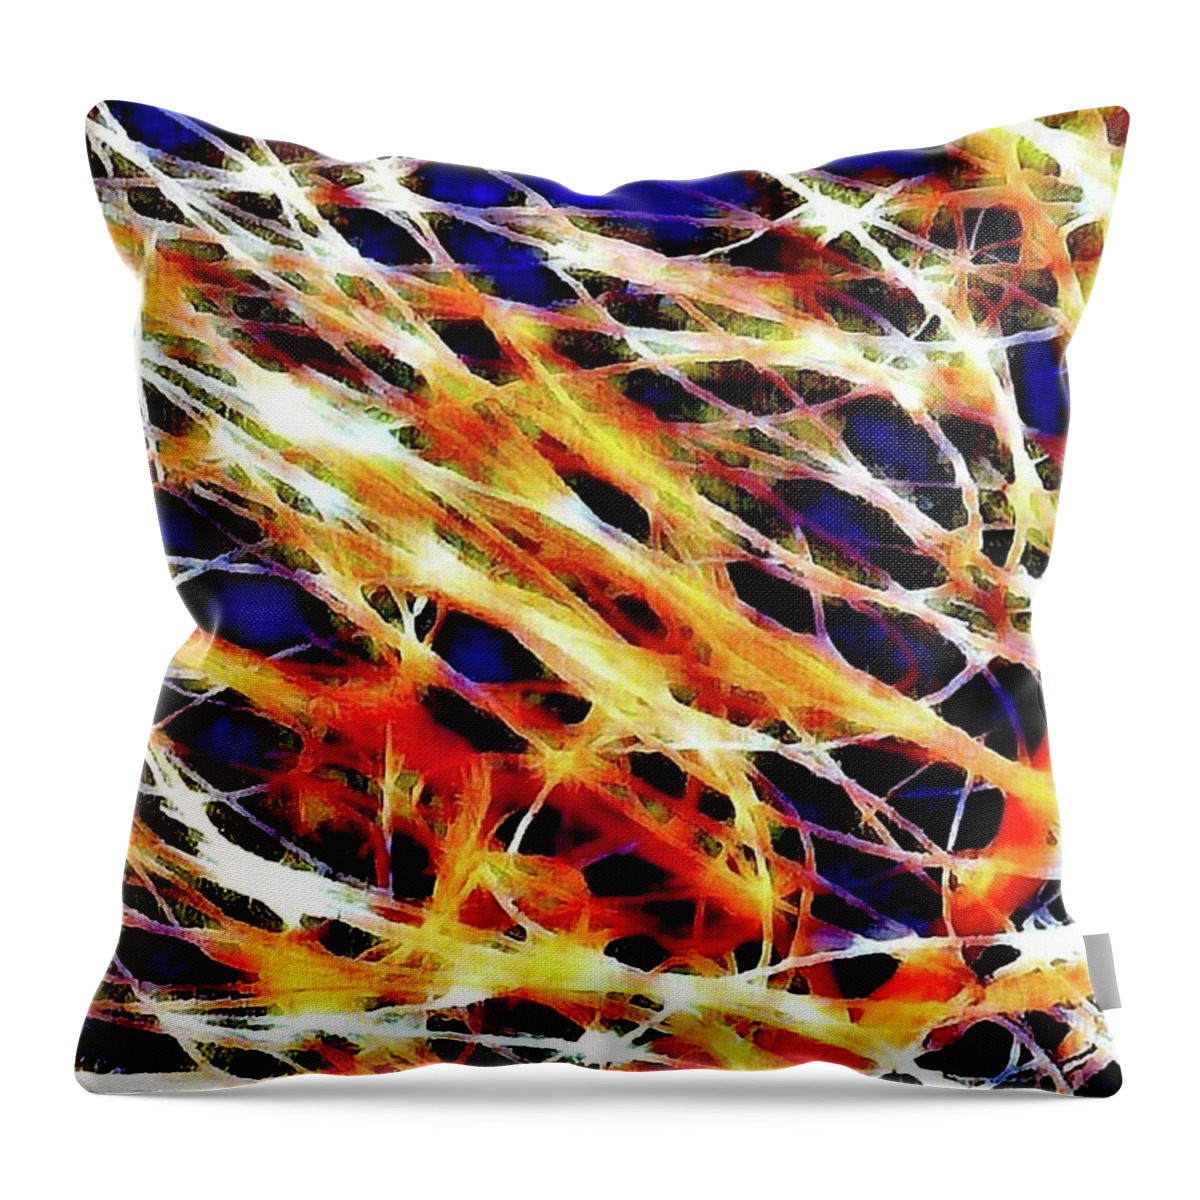 Digital Art Throw Pillow featuring the digital art Destiny Abstract by Tracey Lee Cassin